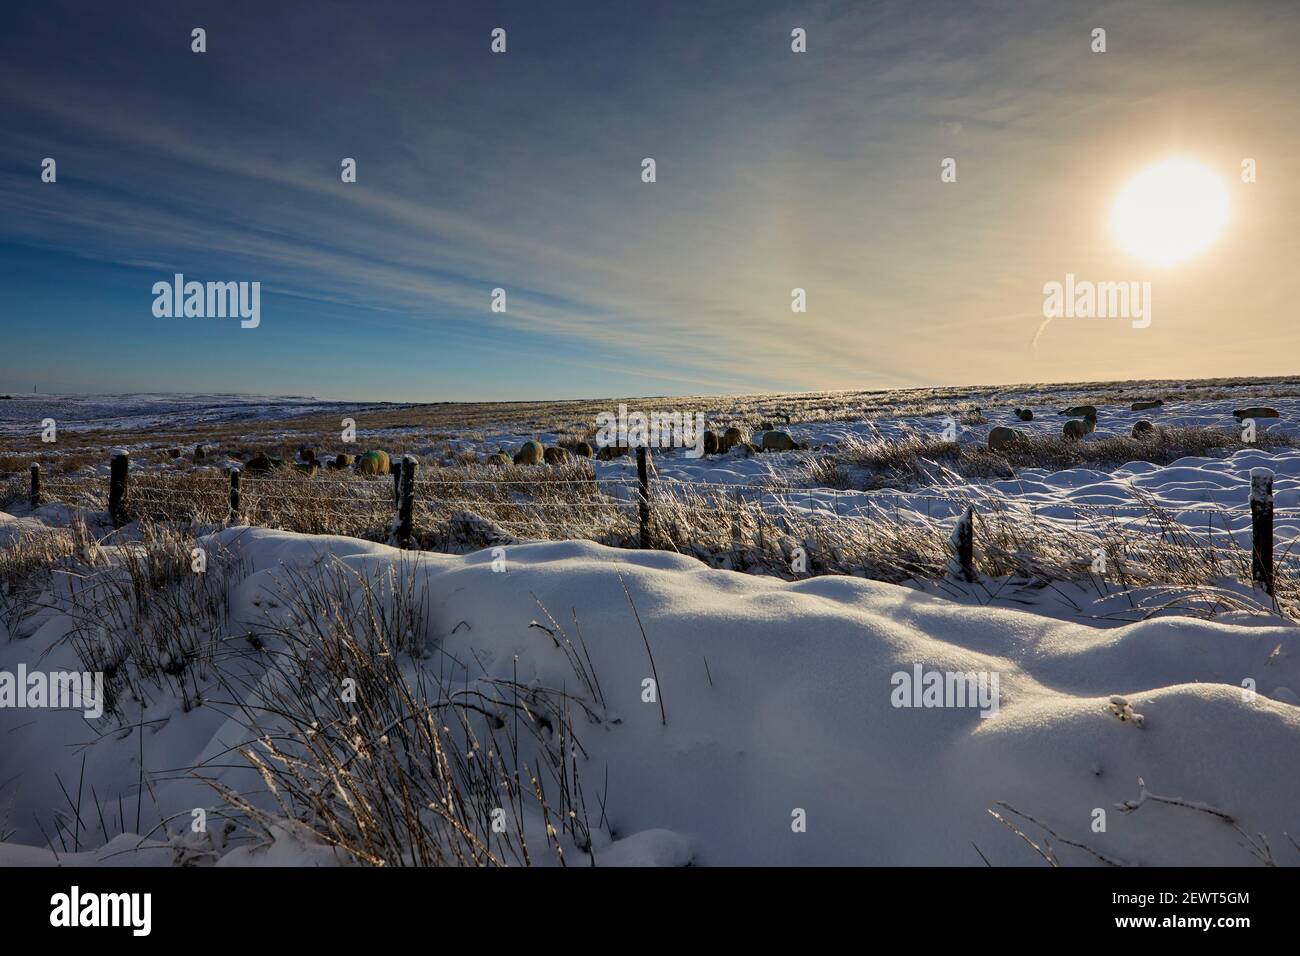 A flock of Dalesbred sheep graze on snowy moorland in Yorkshire Stock Photo